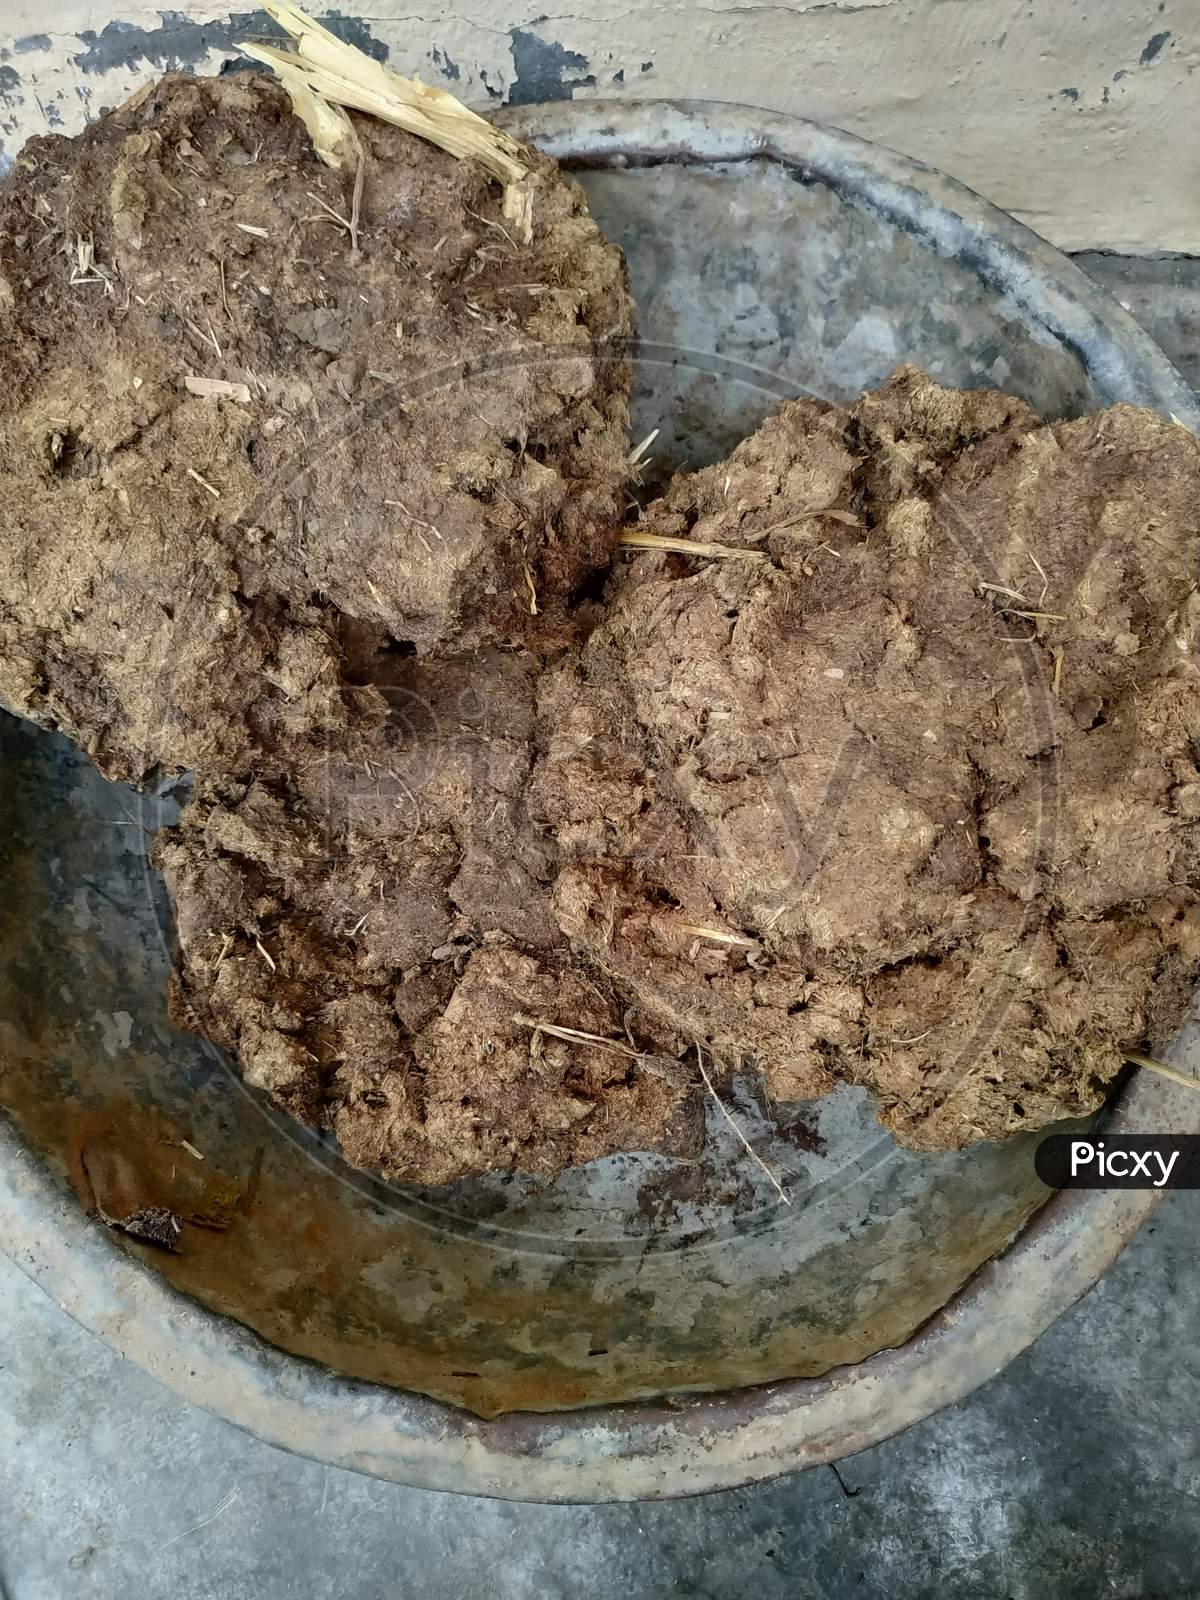 Organic Cow Dung Cake/HAWAN UPLE/KANDE/THEPDI/CHHANA,Cow dung cakes have been used in traditional Indian households for Hawan kund, yagnas, ceremonies, rituals. Pure Desi conw dung cake.